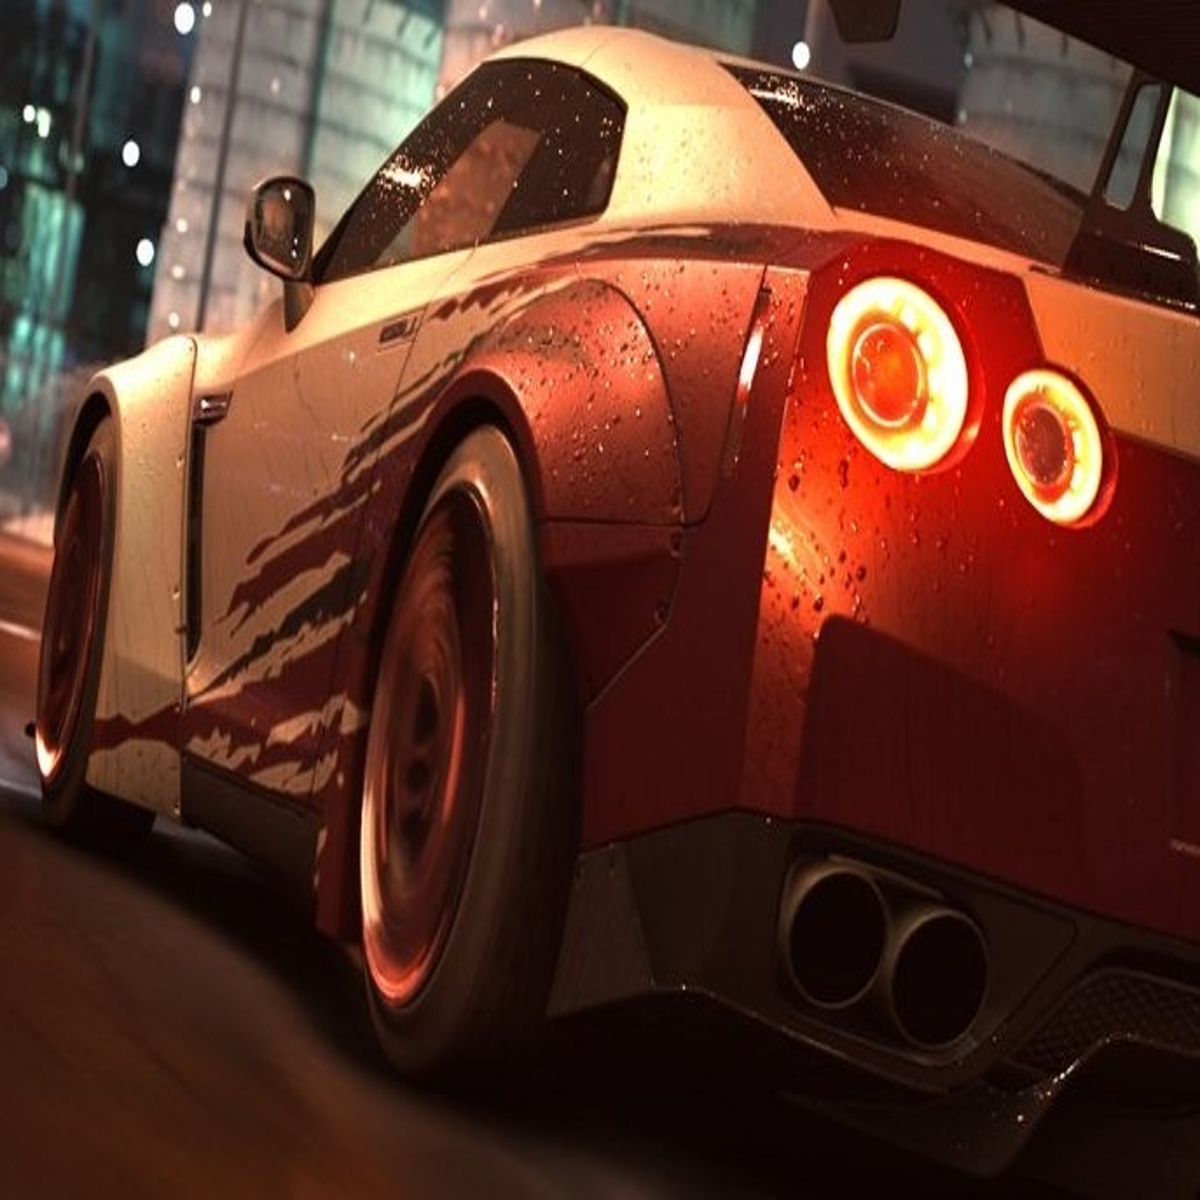 EA's new Need for Speed: Payback looks very fast and fairly